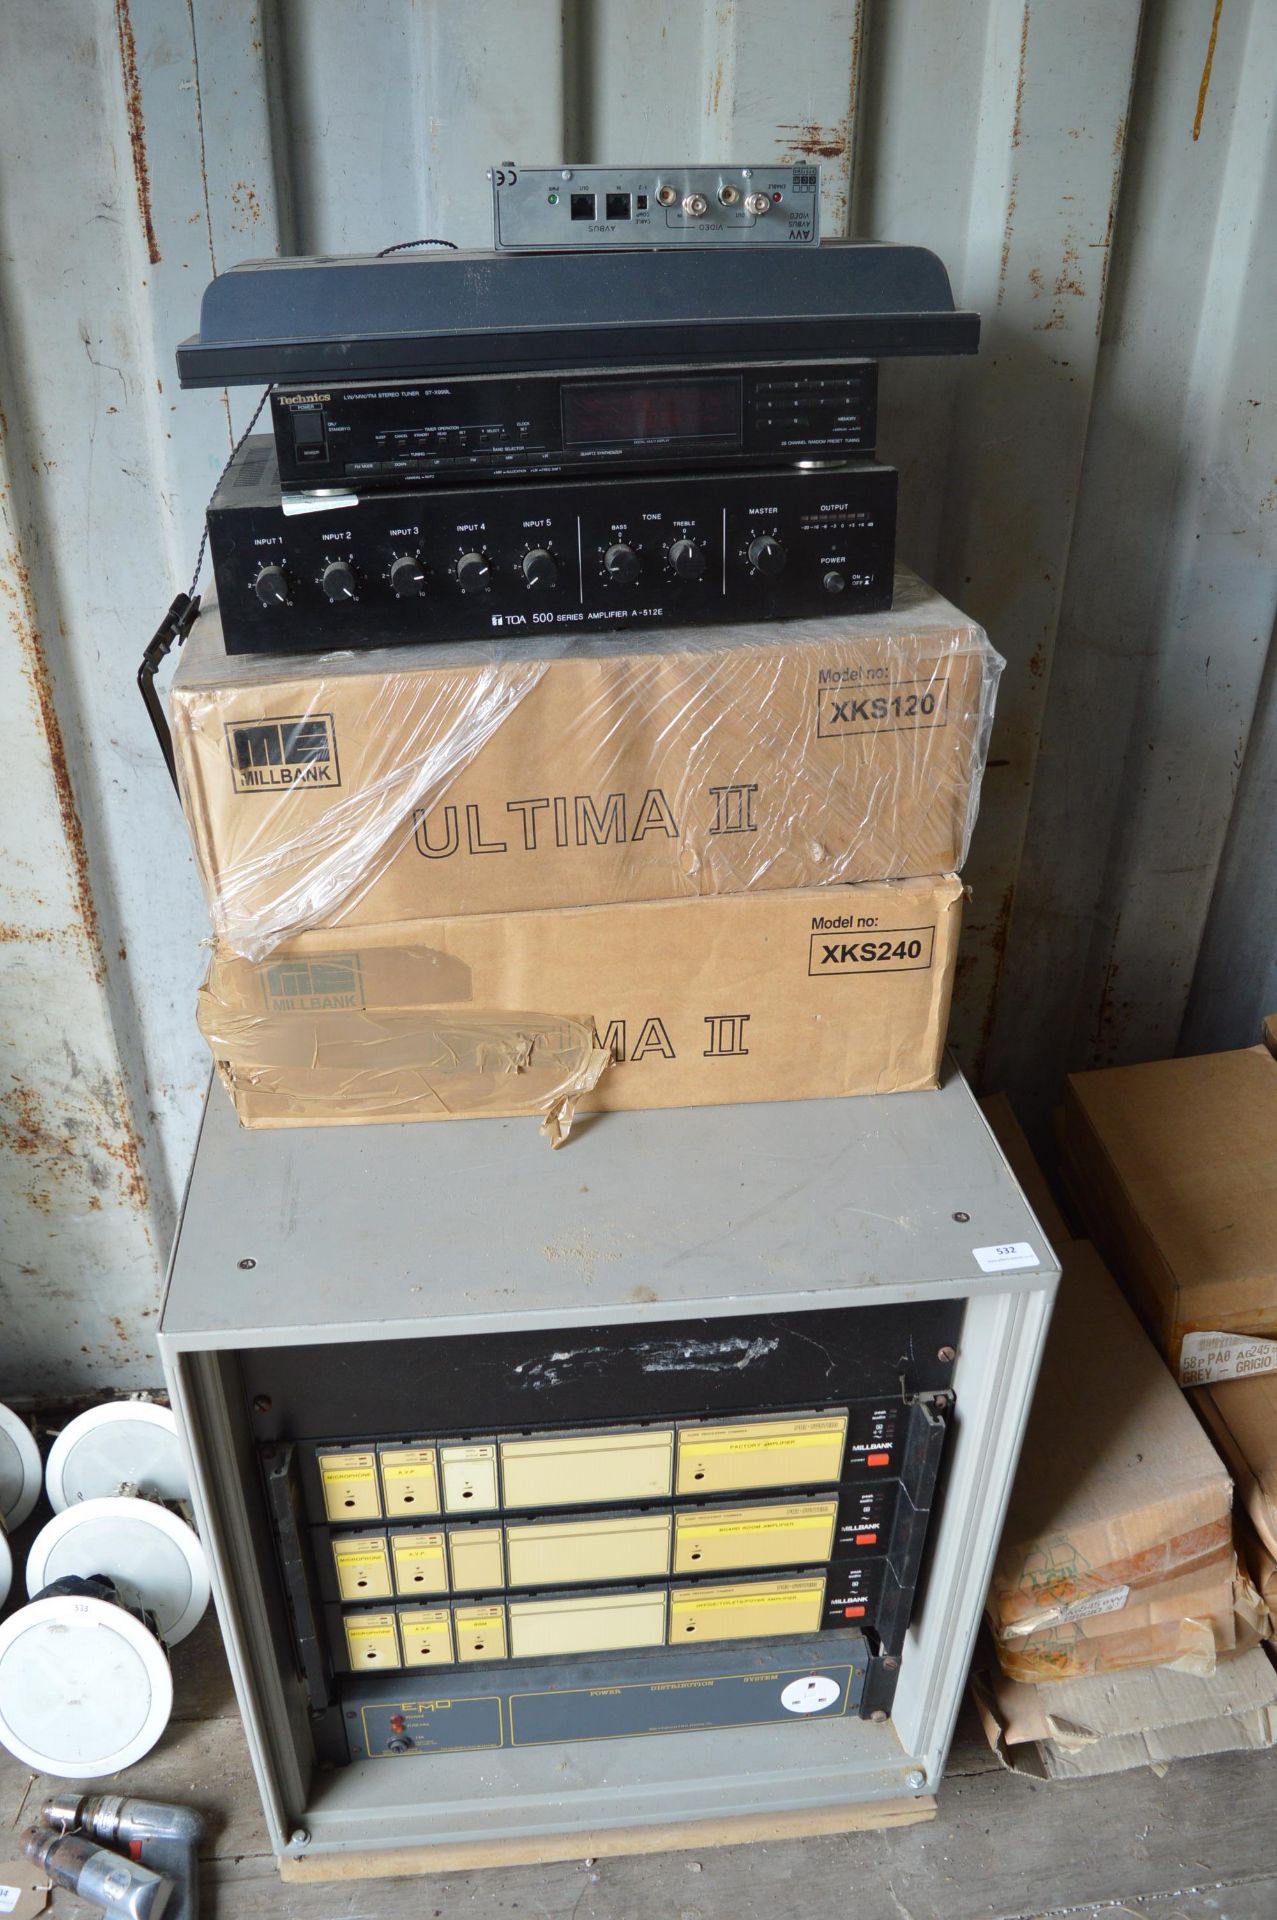 Assorted Amplifiers, Technics Tuner, Milbank Ultima 2 XKS120 & XKS240, and a Box Containing 3